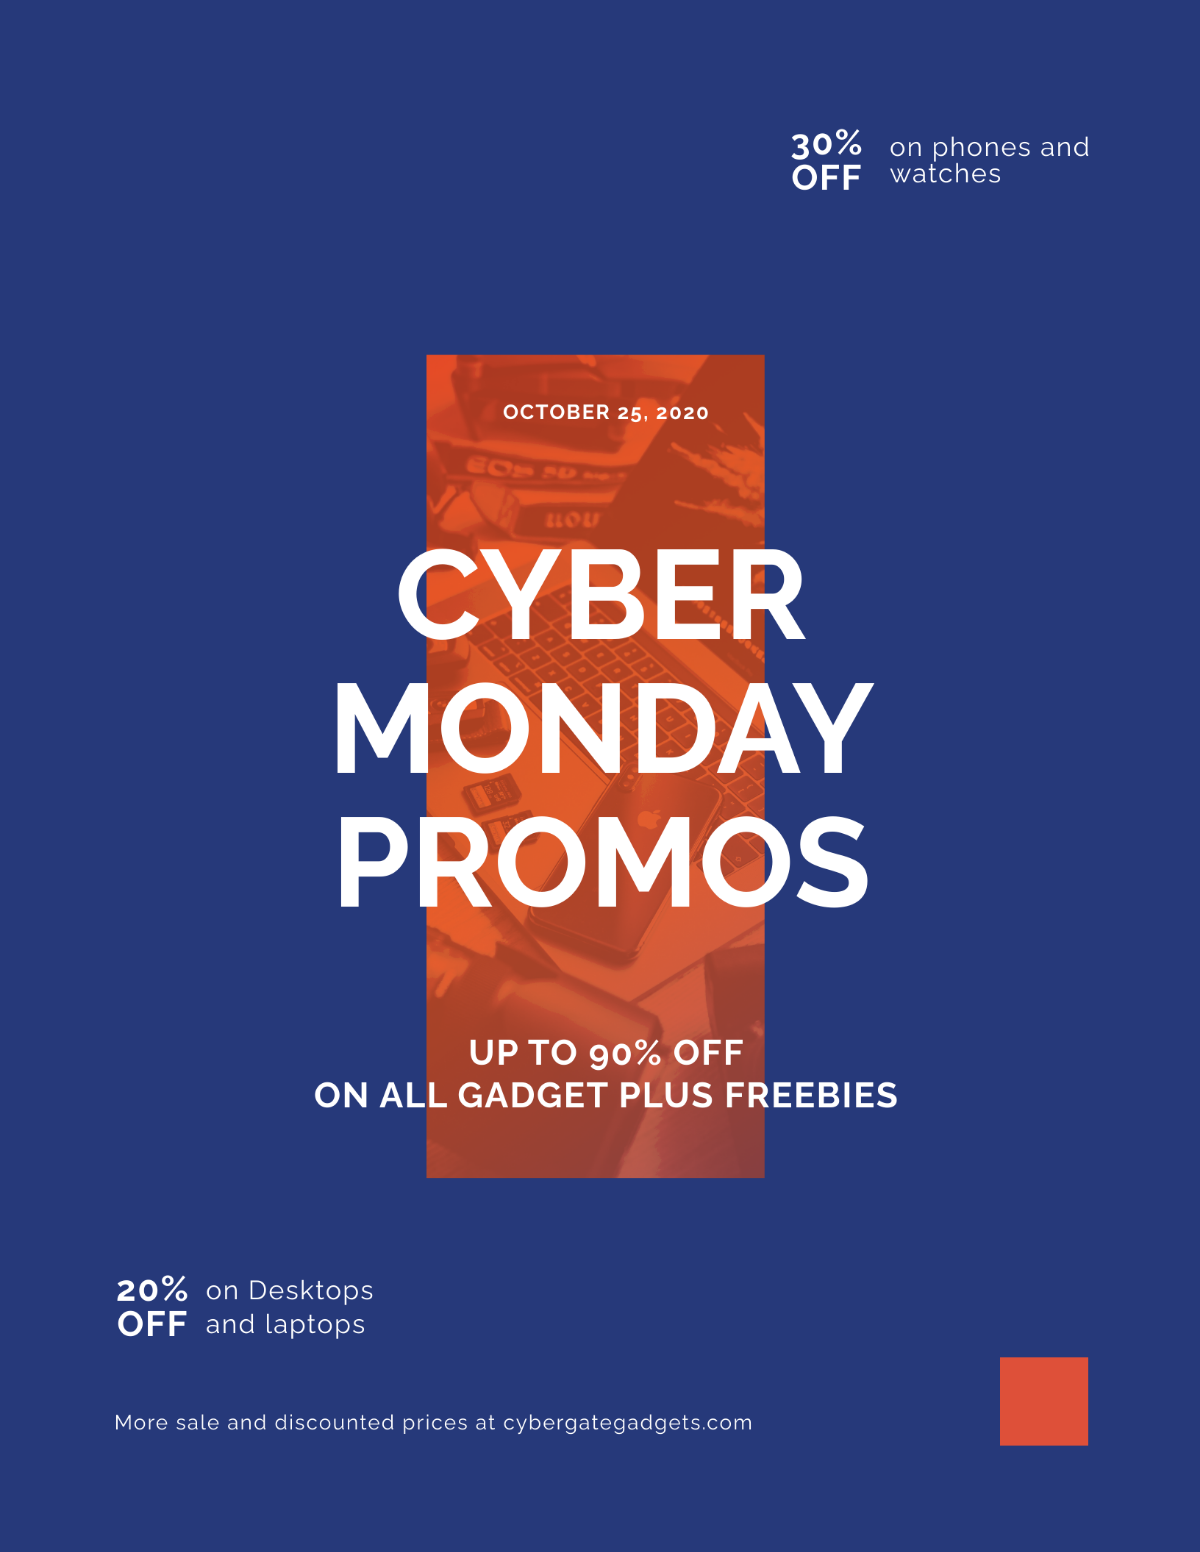 Cyber Monday Promotional Flyer Template